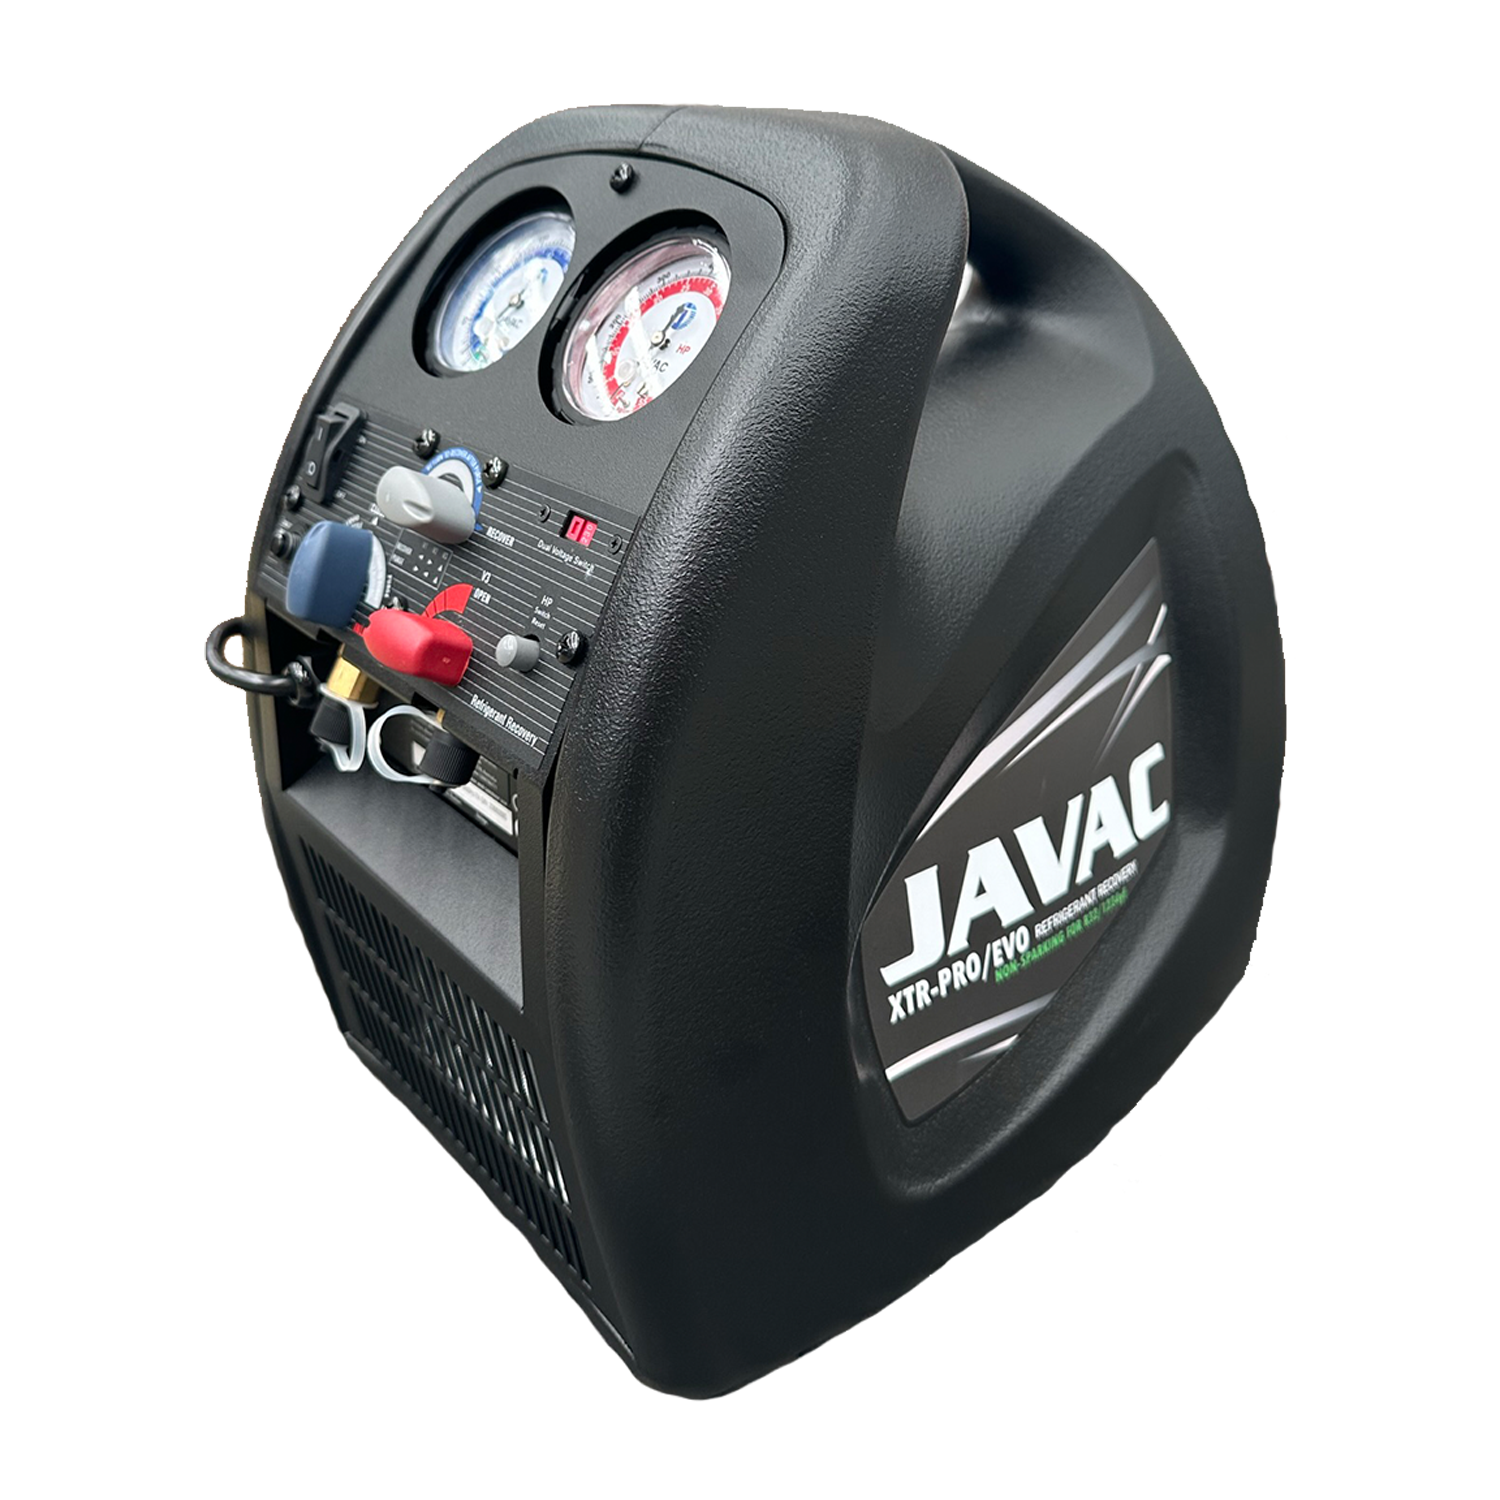 JAVAC XTR PRO Recovery Machine - Non-Sparking - R32, R410 & R134a Compliant